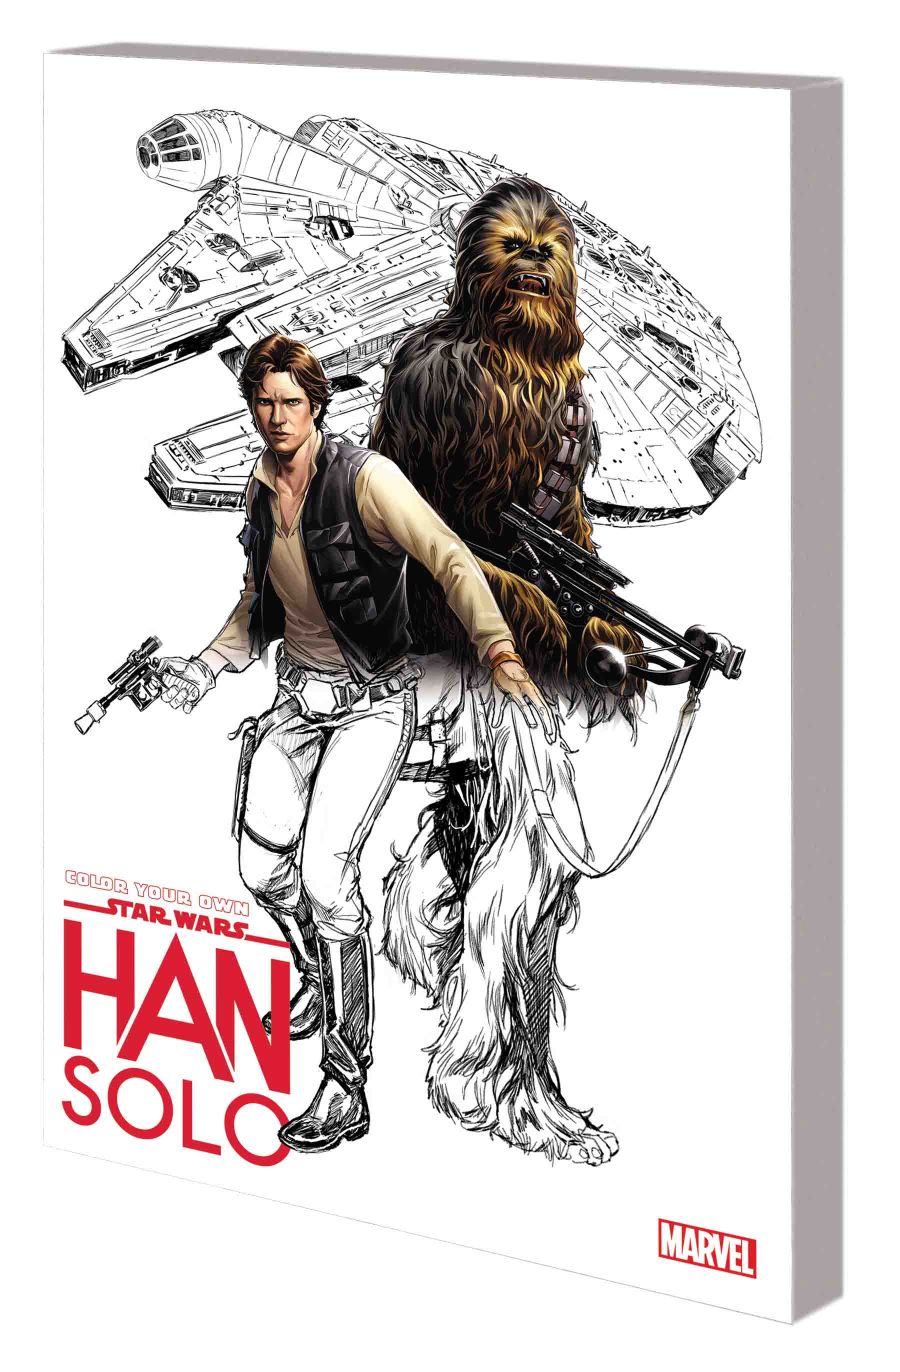 COLOR YOUR OWN STAR WARS: HAN SOLO